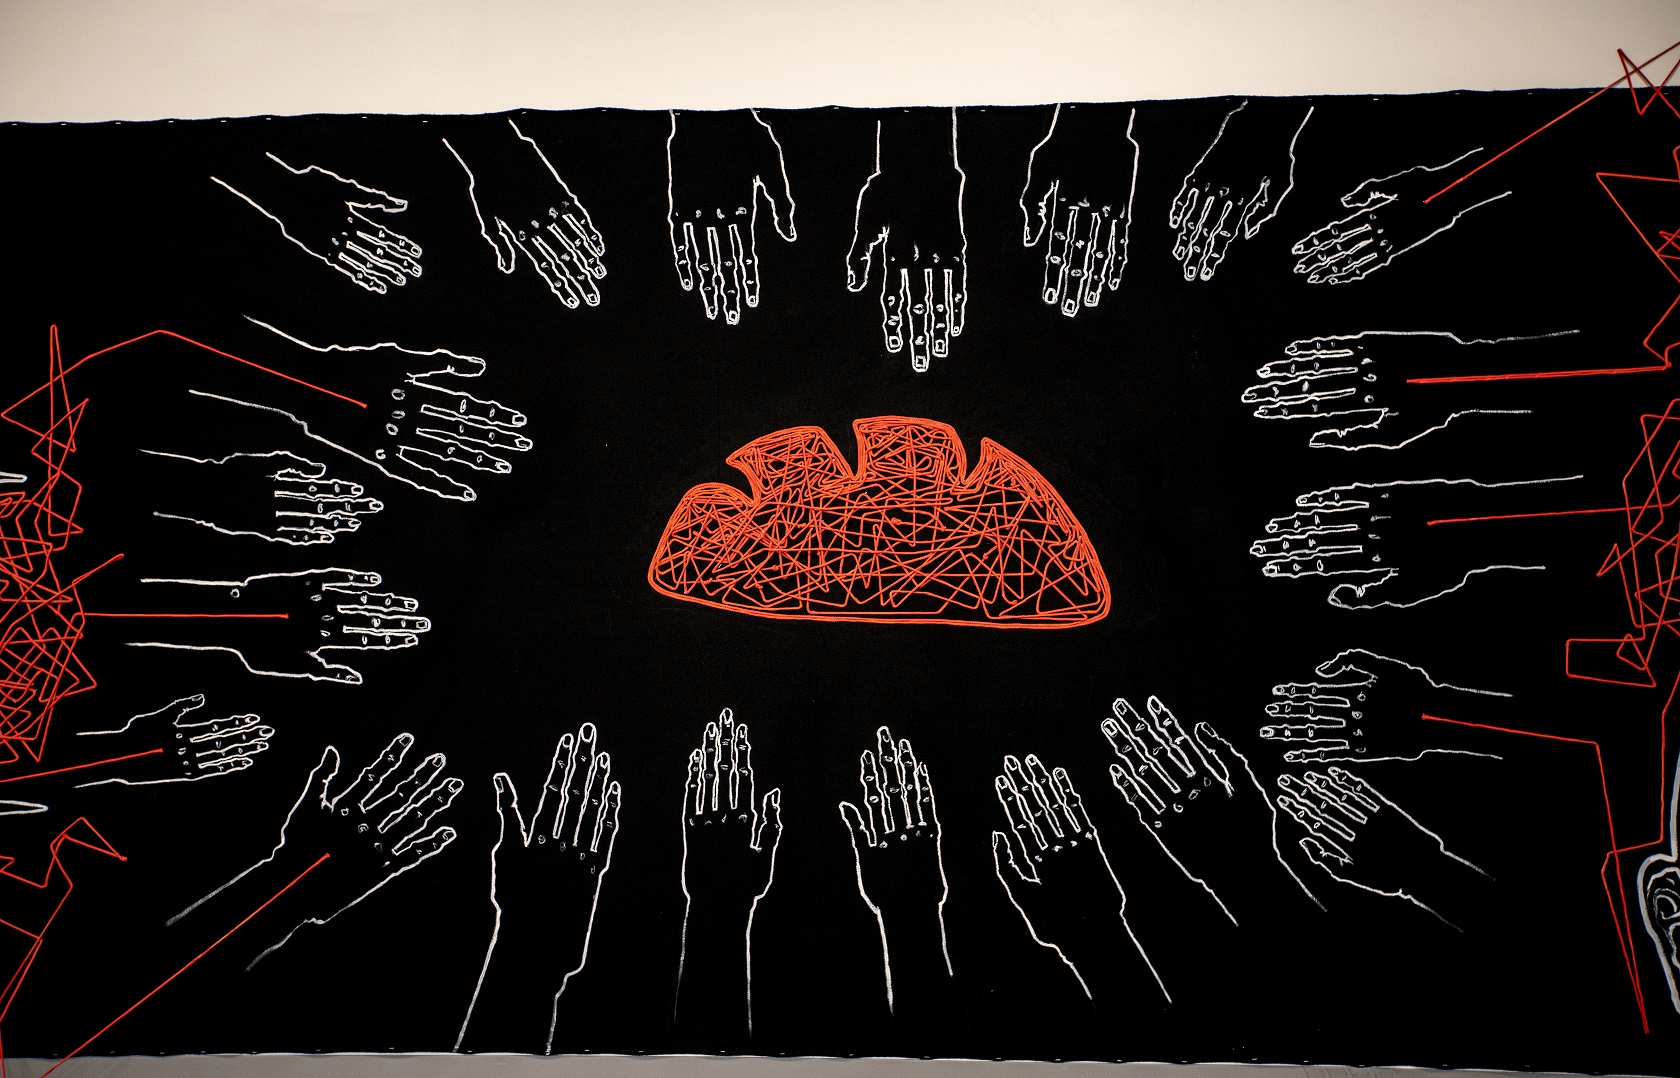 Black canvas stretching over 20 meters with white paintings and red lines. Lots of hands reaching for a loaf of bread.